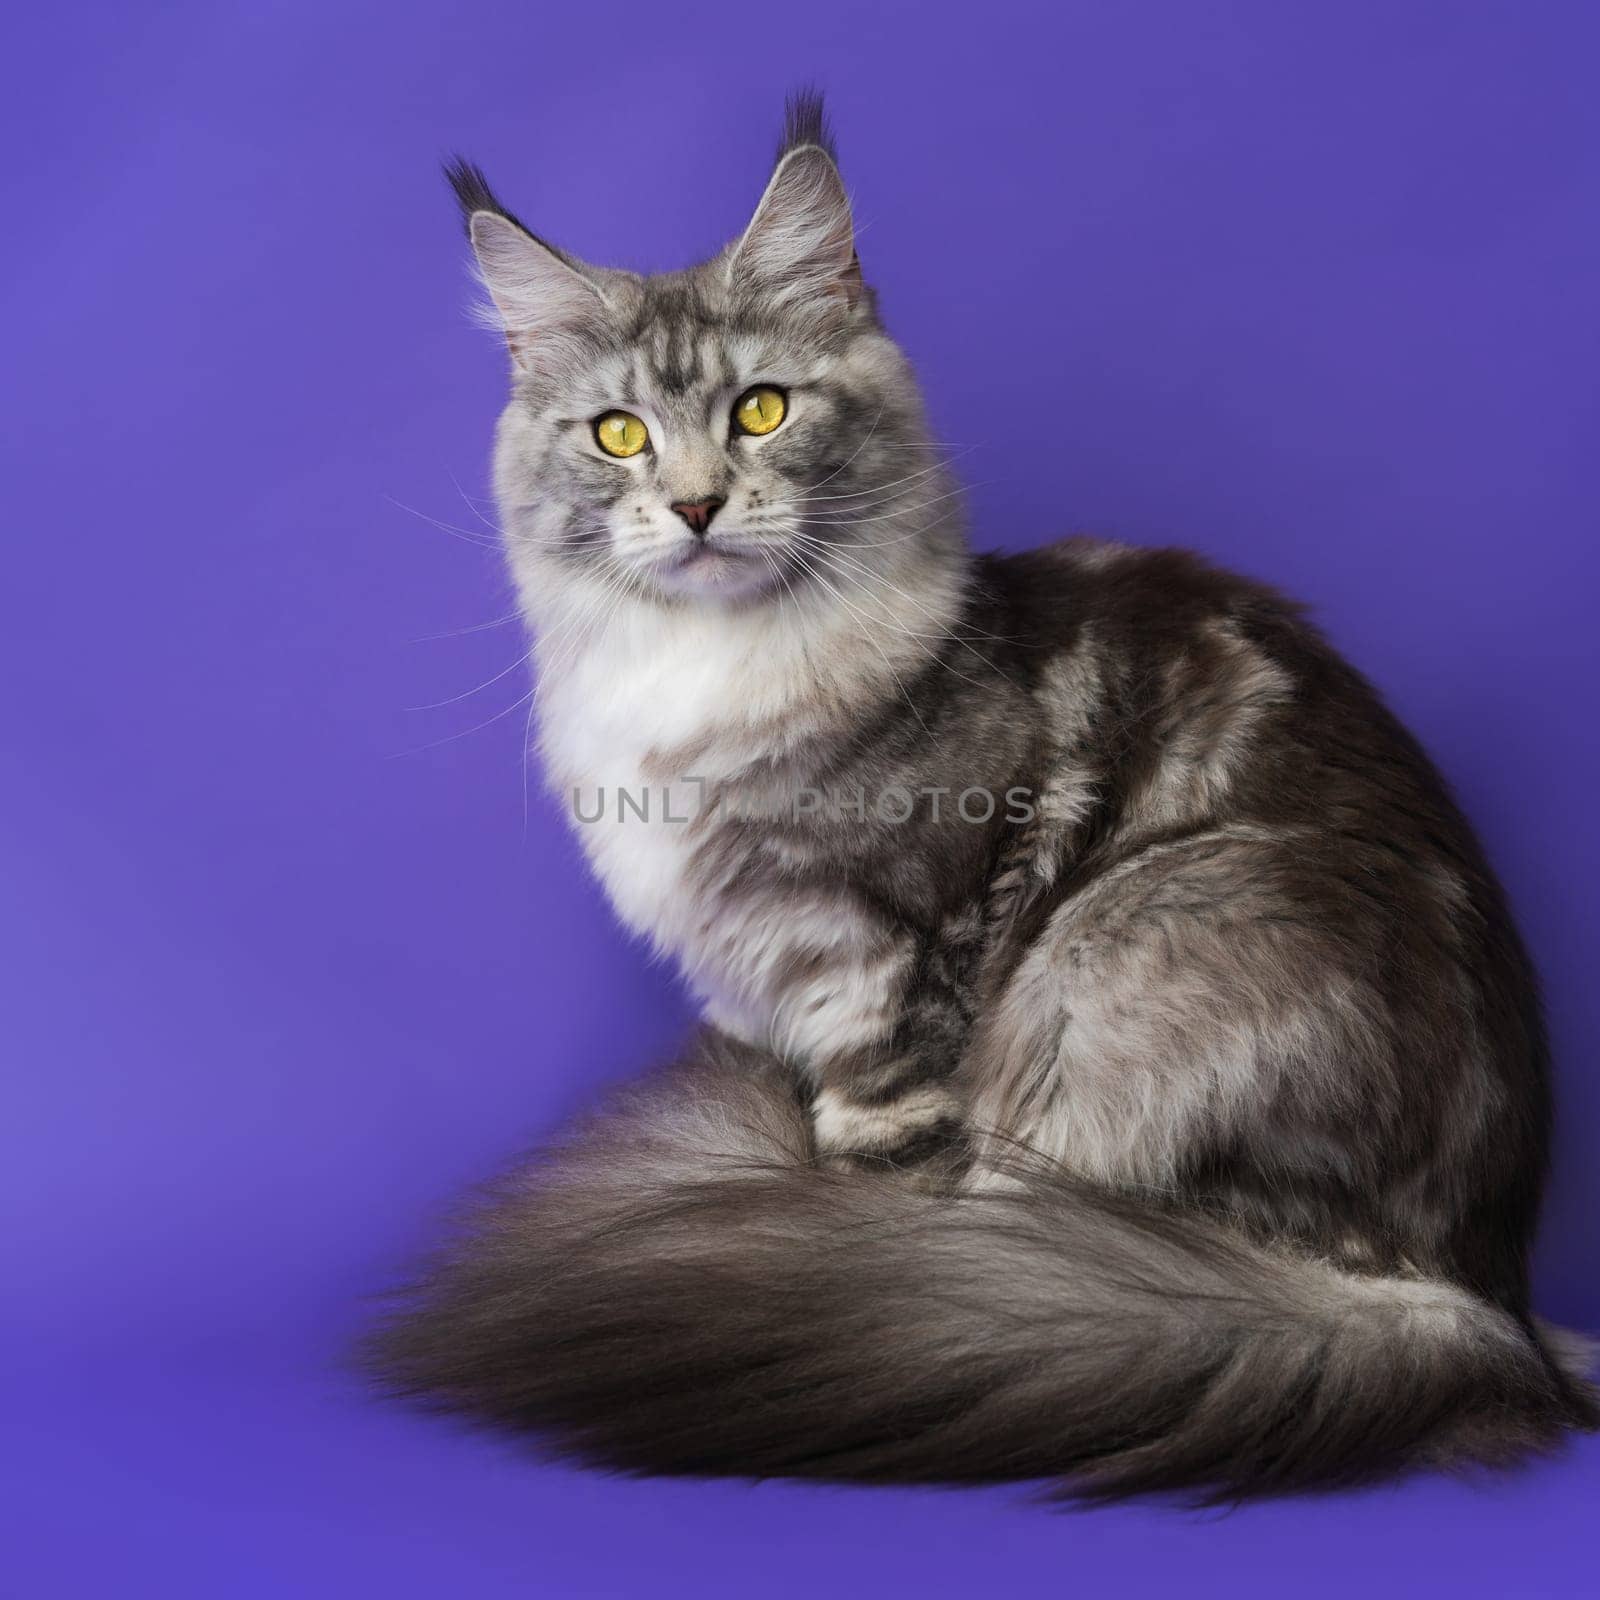 Square format view of Longhair Maine Coon Cat with yellow eyes looking at camera on blue background. Purebred kitten one year old black silver classic tabby white color meekly sitting indoors.